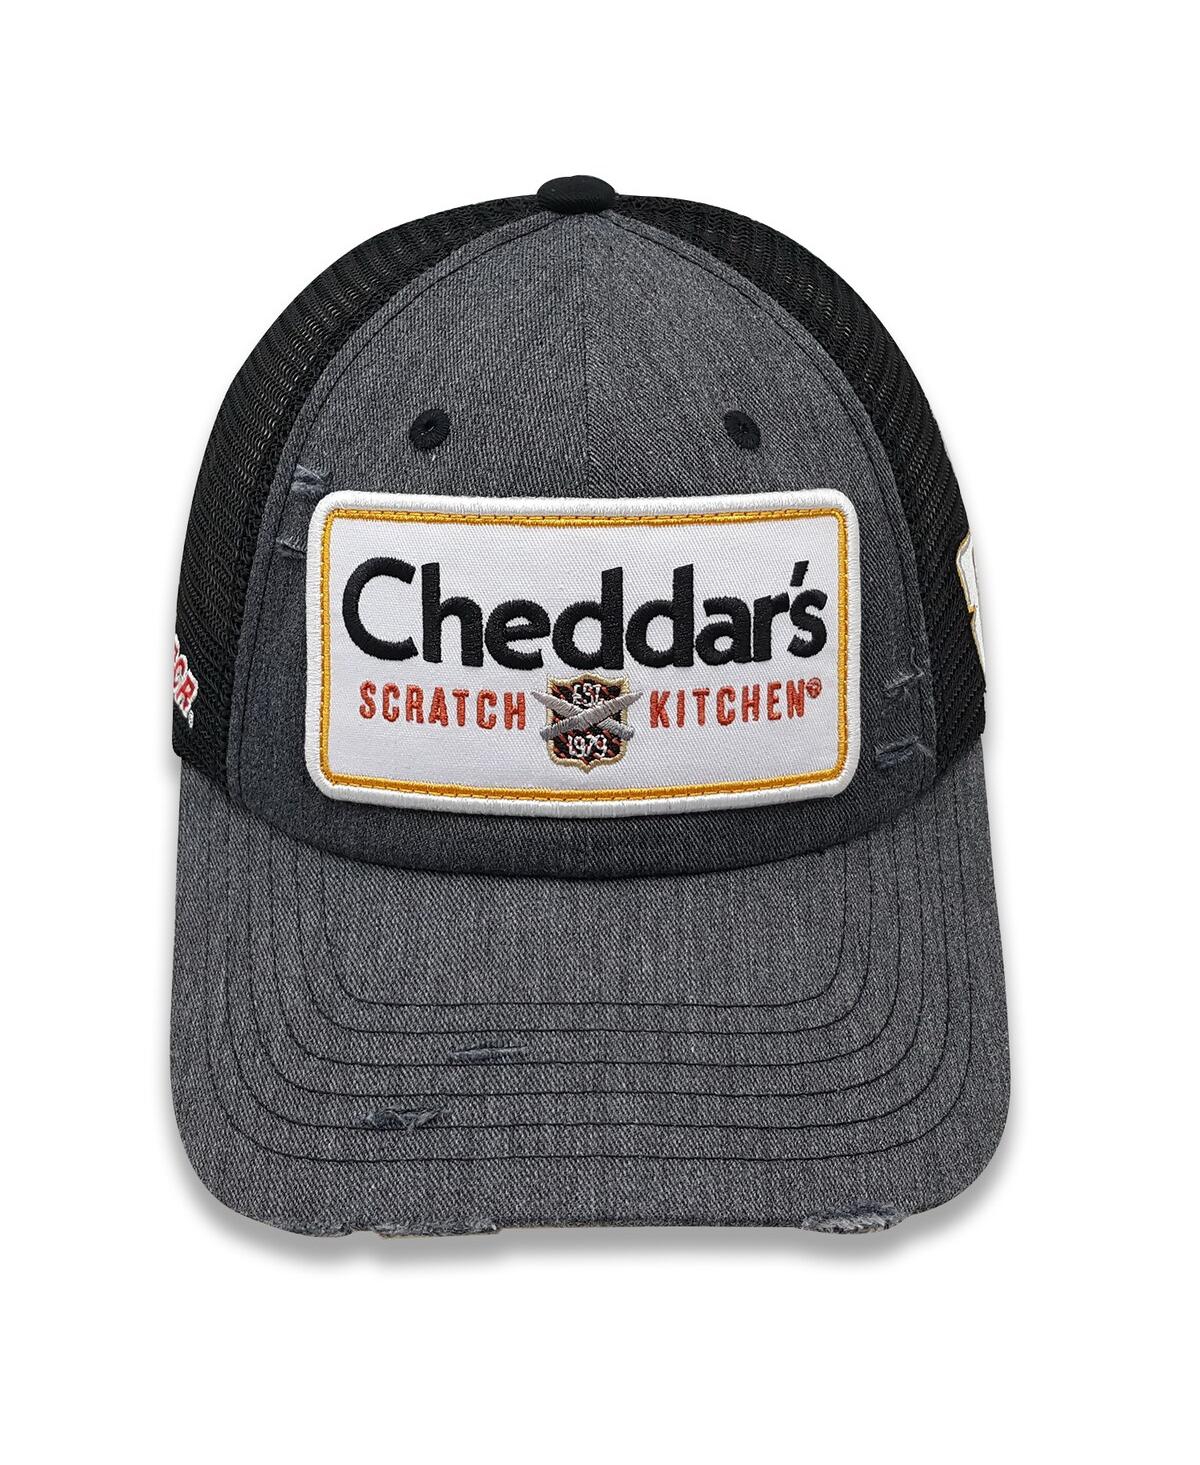 Richard Childress Racing Team Collection Men's  Gray, Black Kyle Busch Cheddar's Retro Patch Adjustab In Gray,black